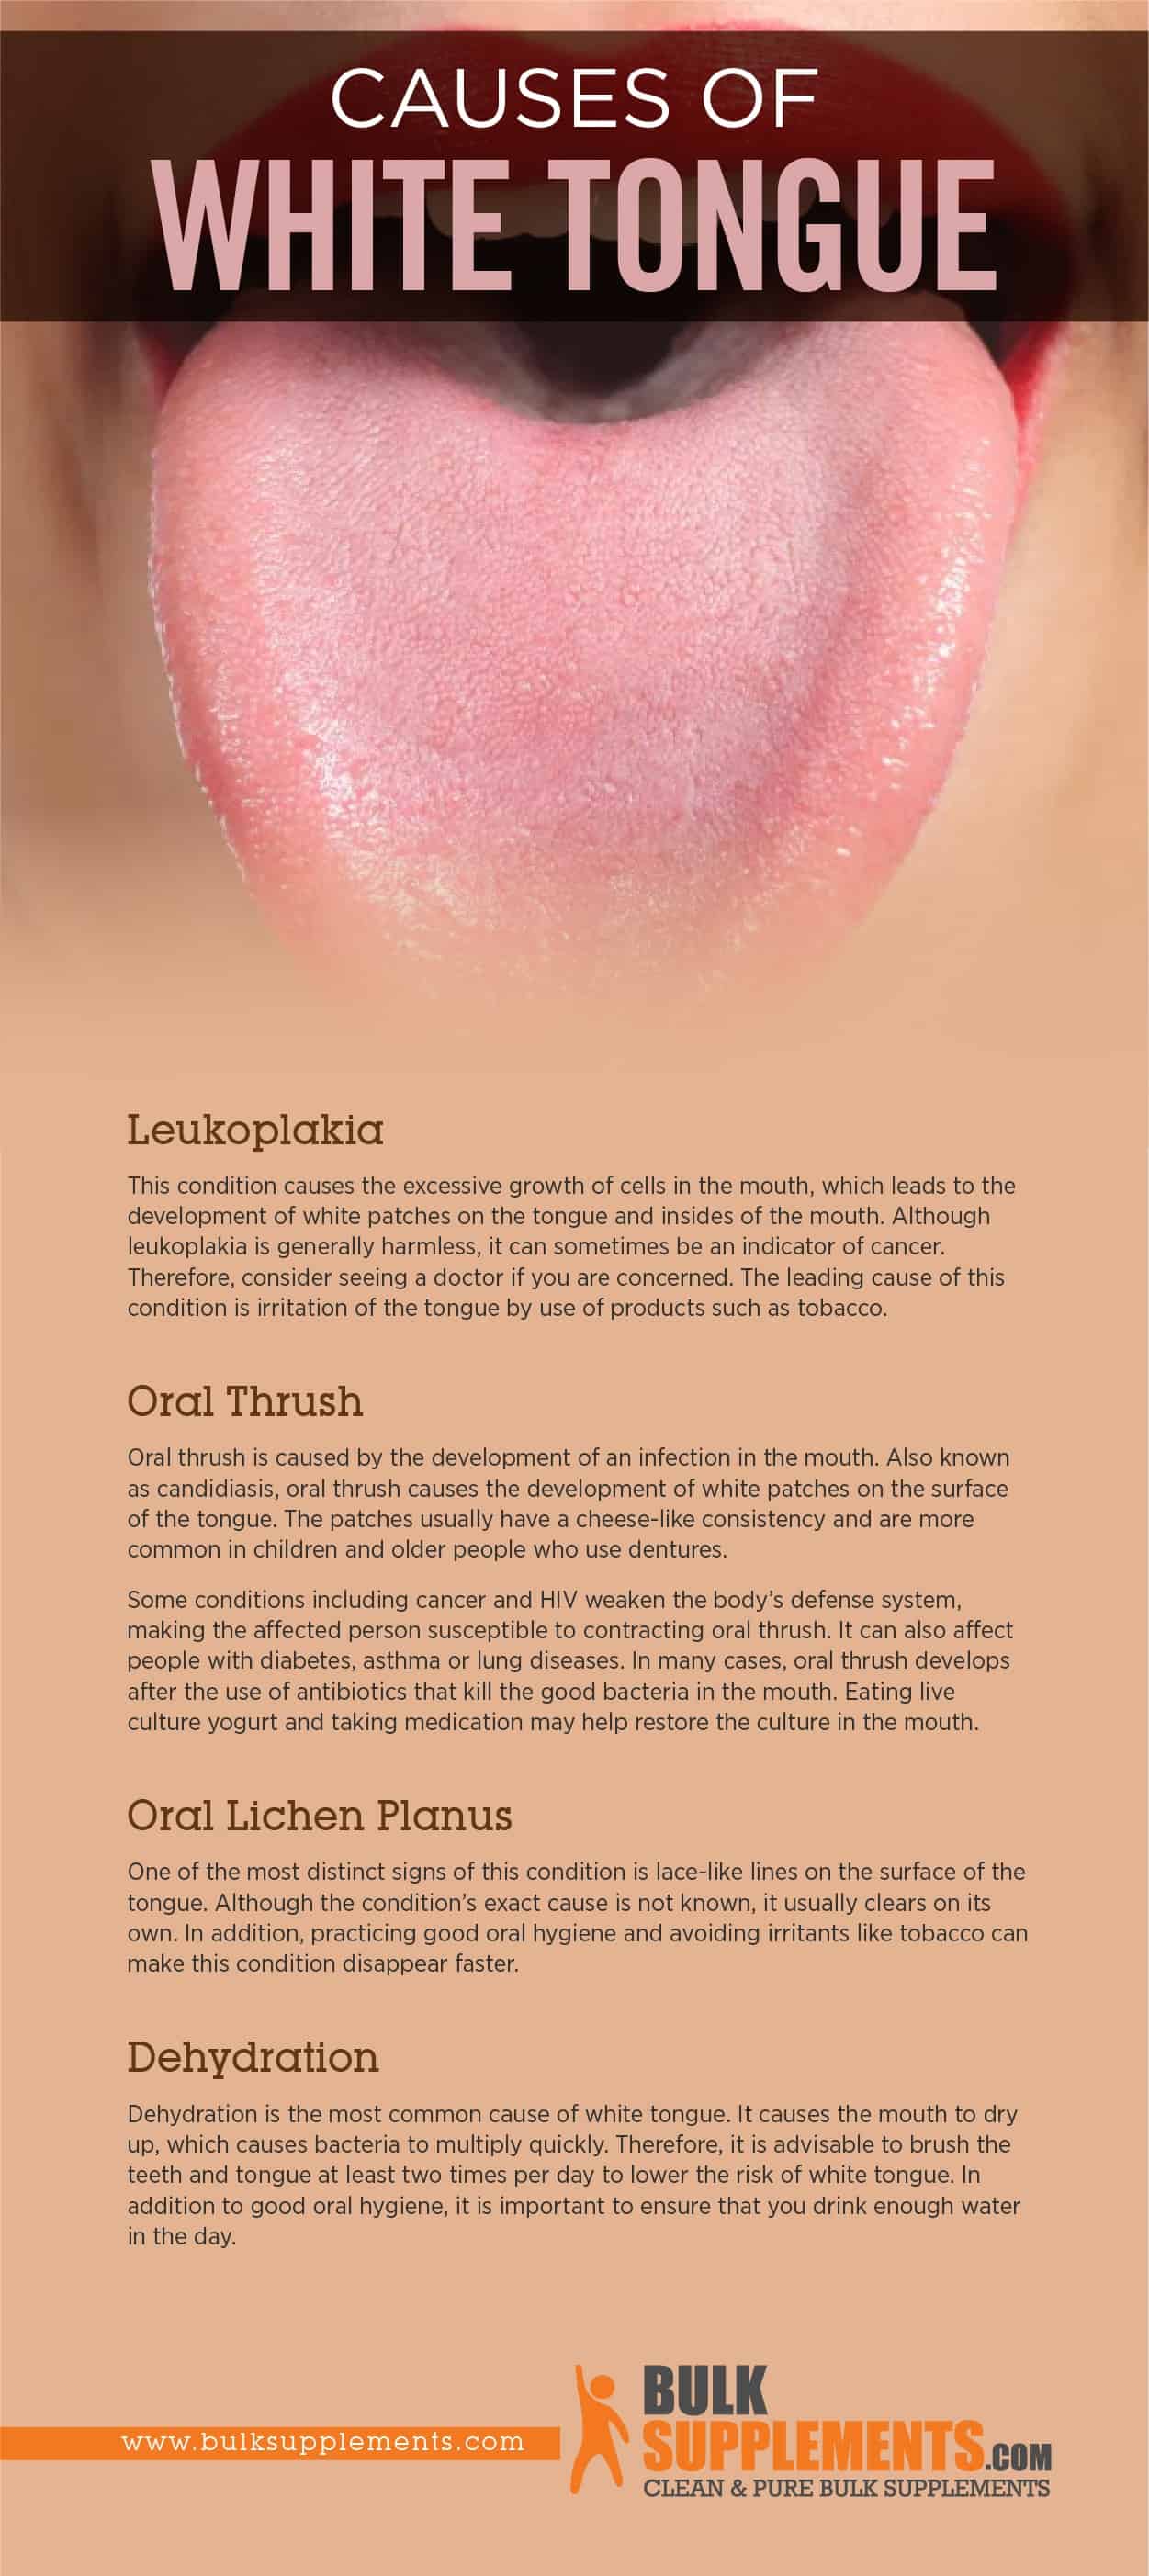 Causes of White Tongue